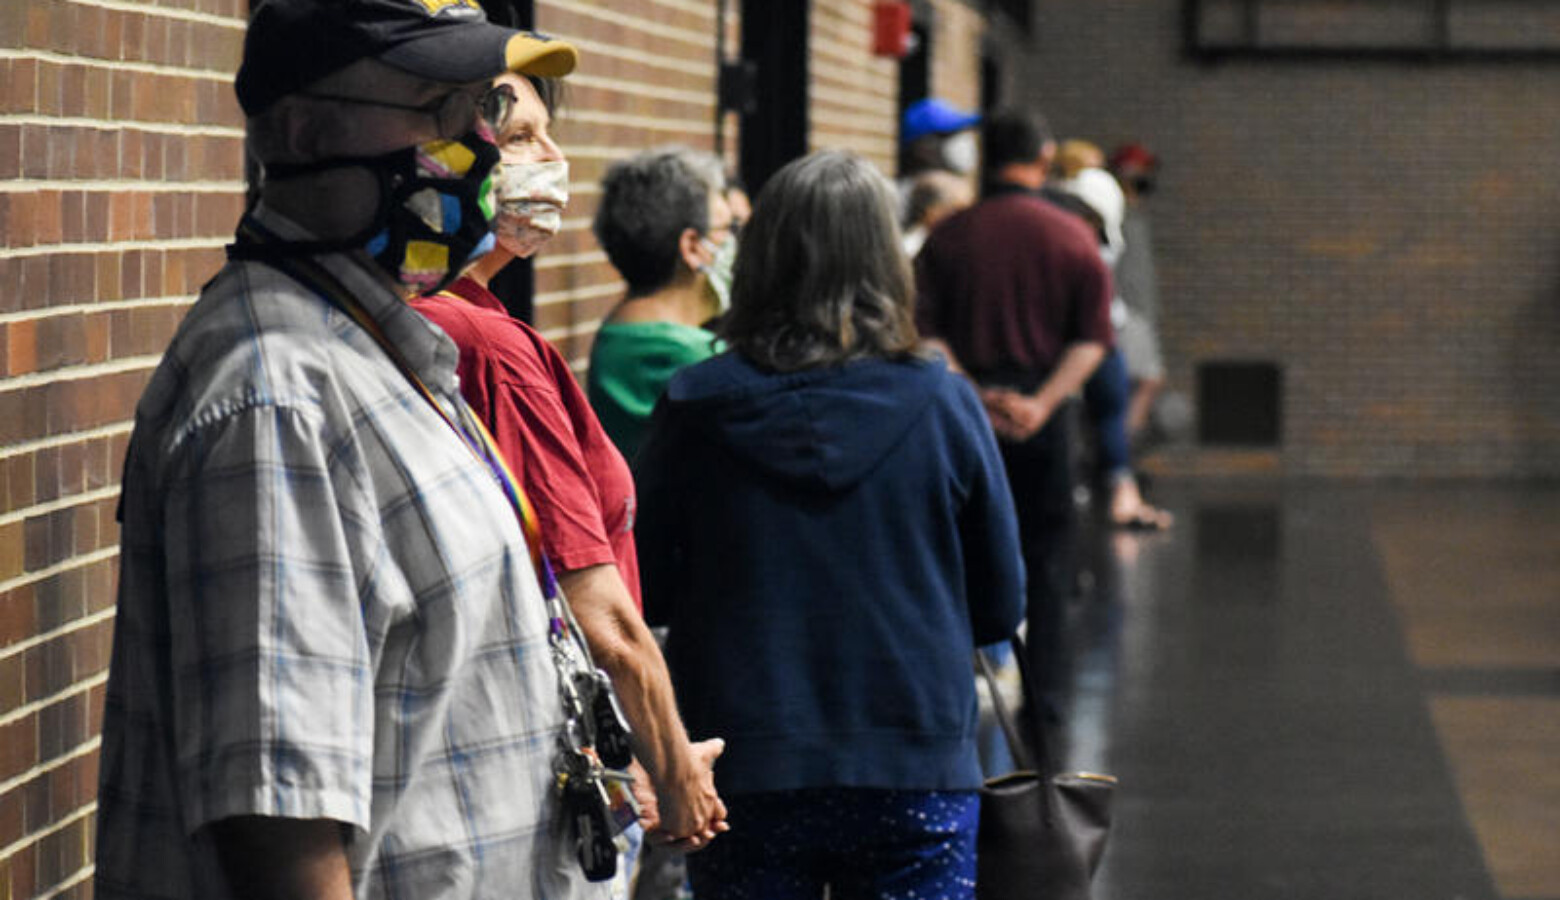 Most Hoosier voters will have to cast their ballots in-person this fall amid the ongoing COVID-19 pandemic. (Justin Hicks/IPB News)